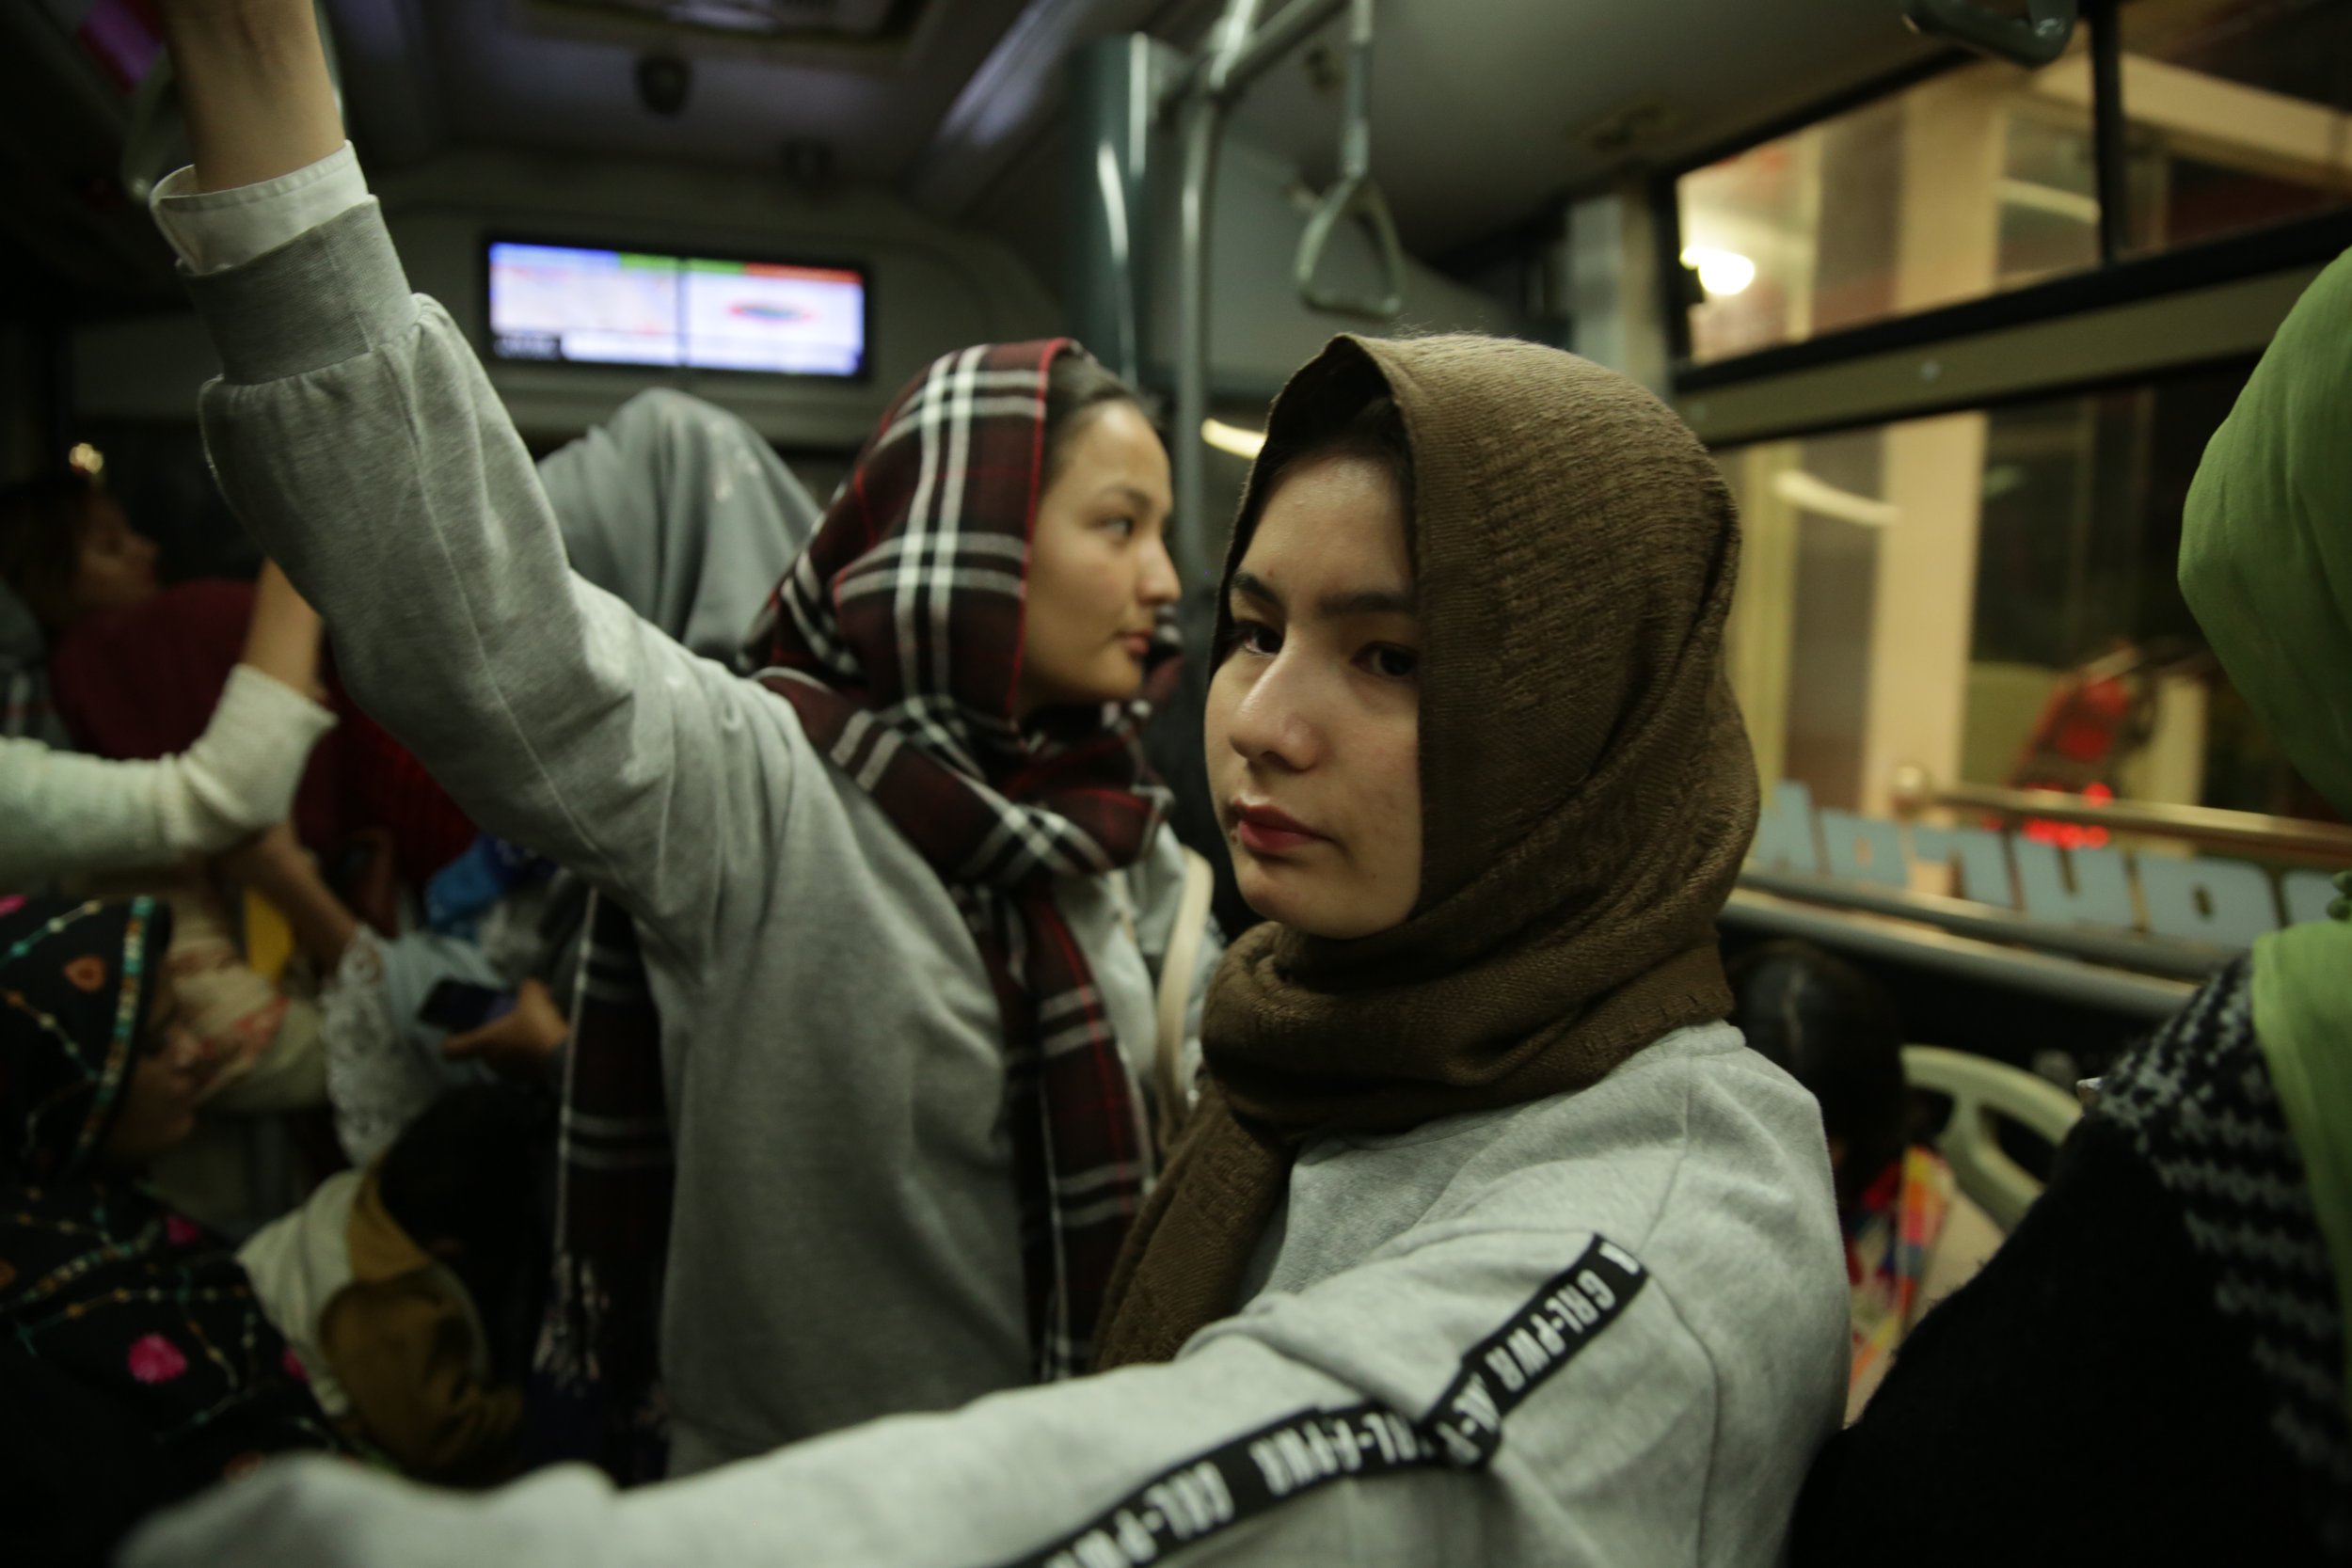  Haleema and Farheen ride public transport which they find very liberating.  